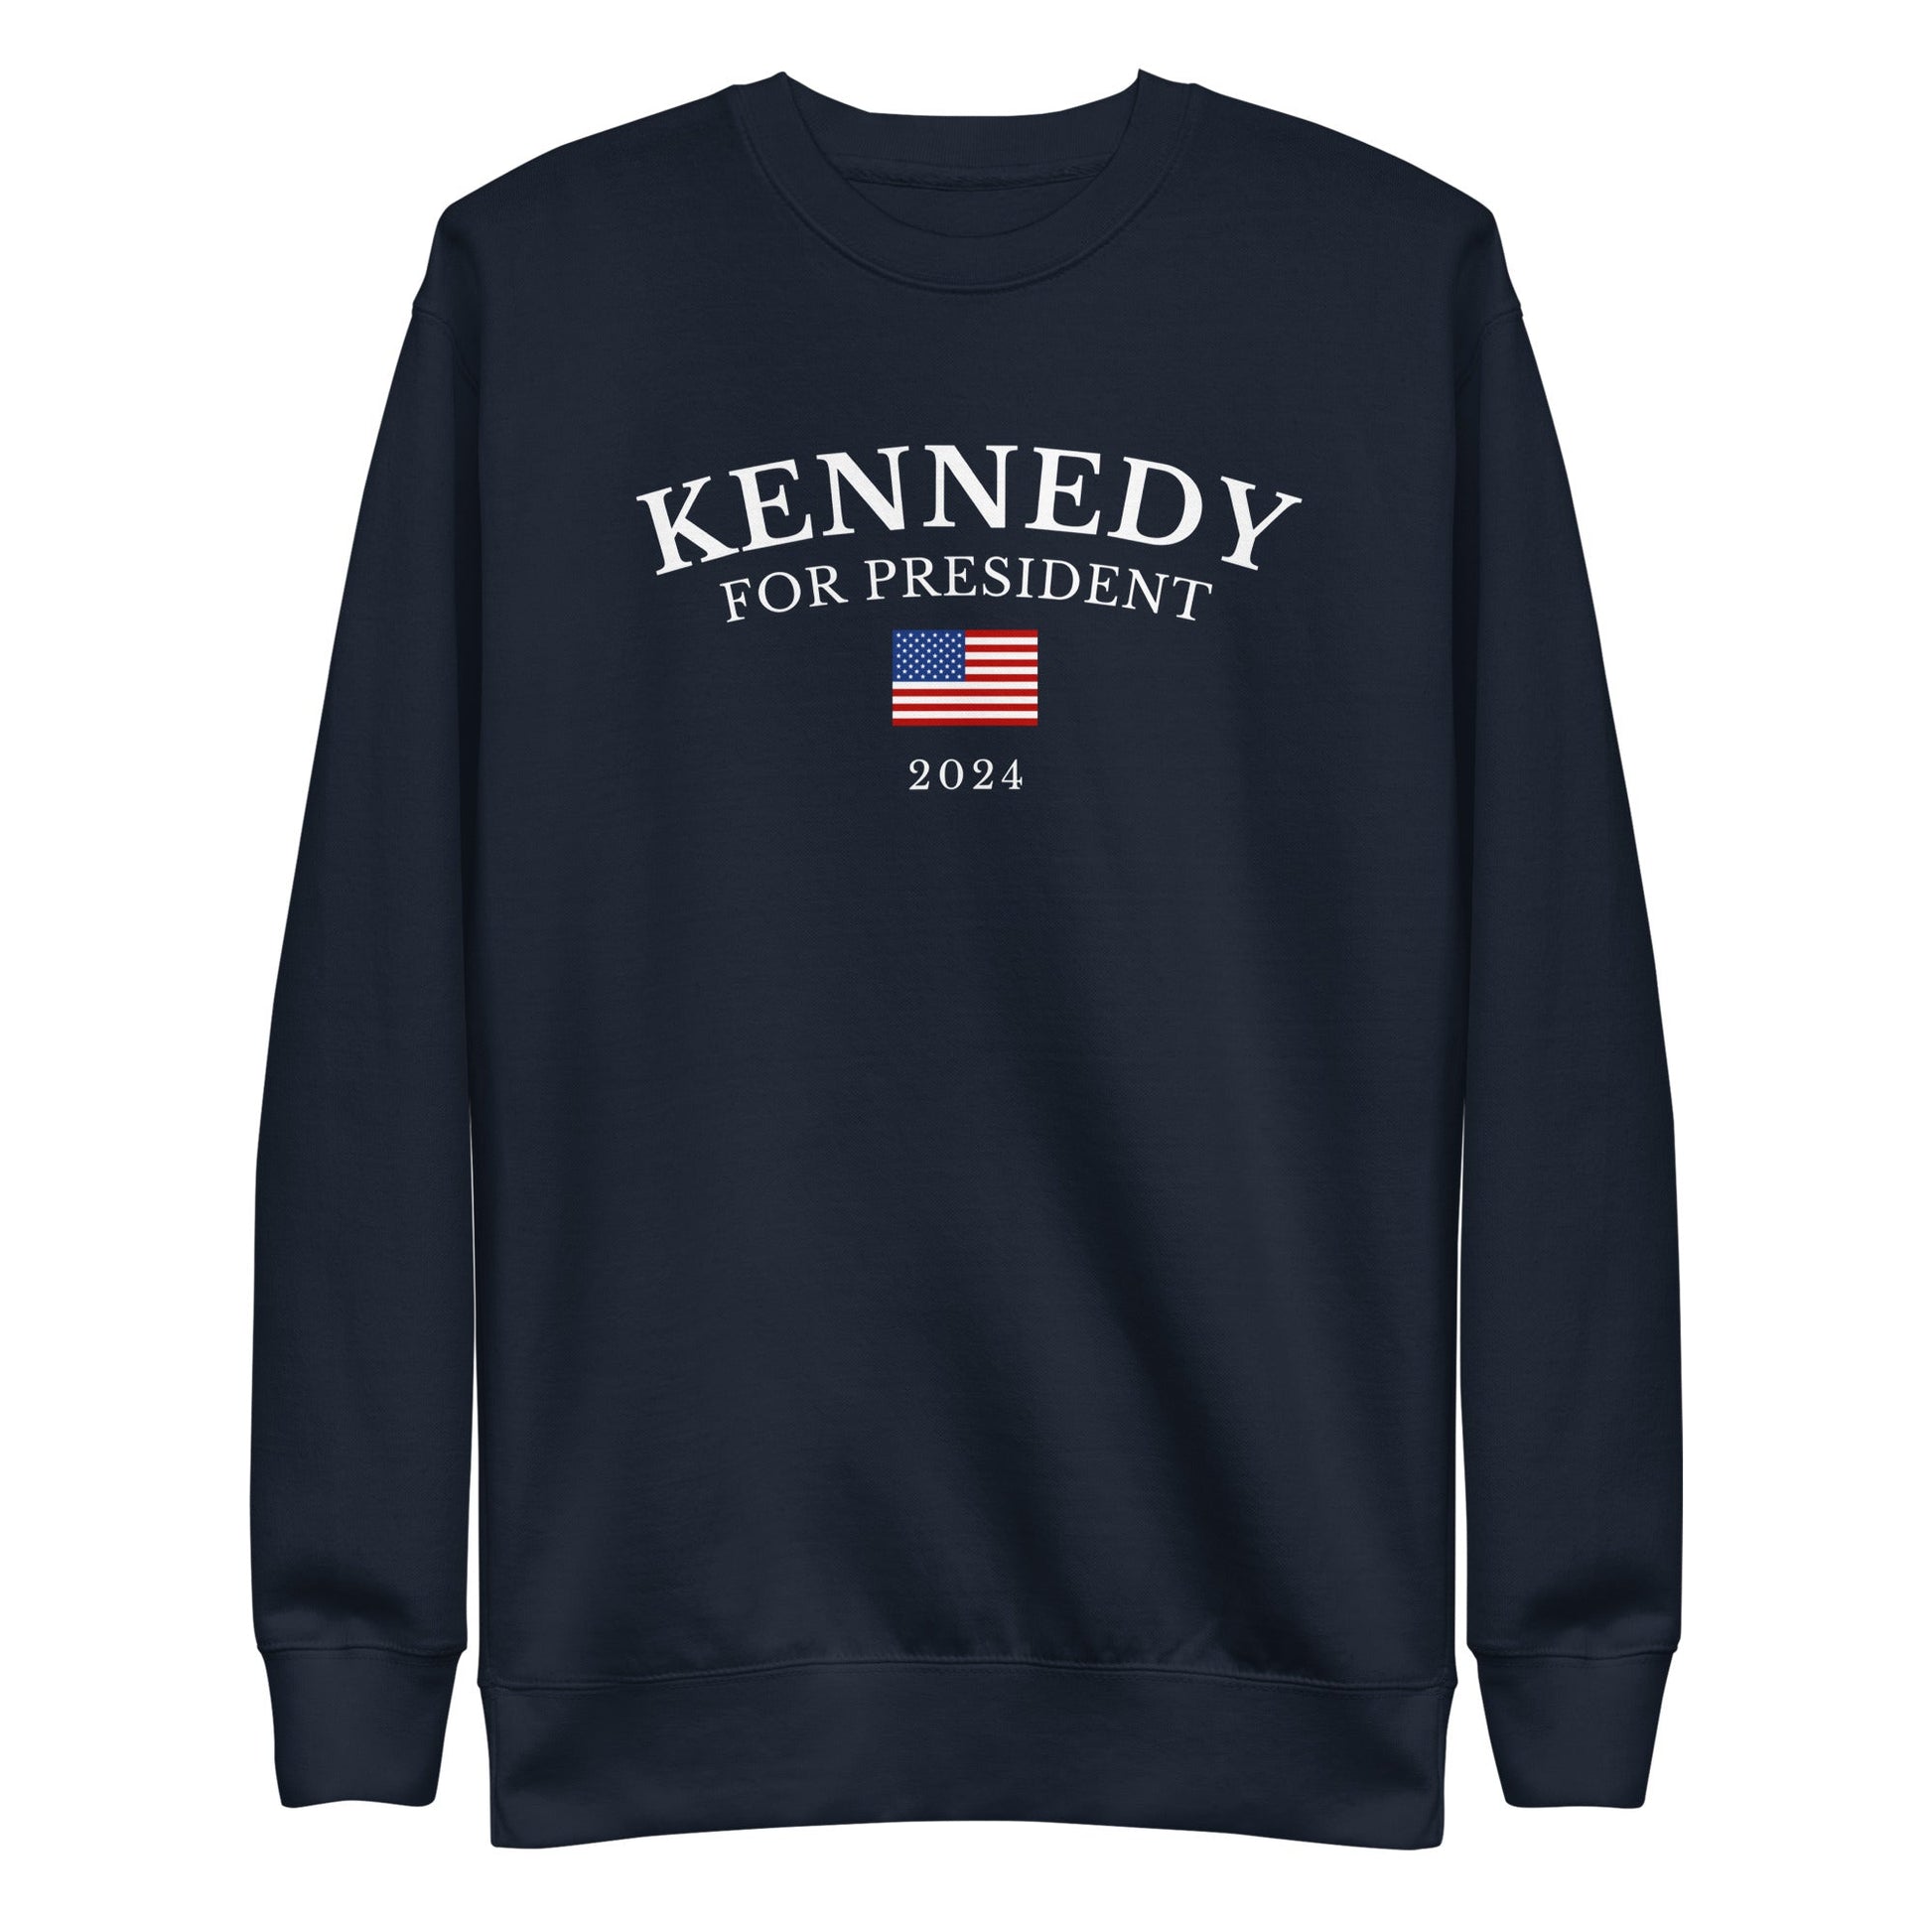 Kennedy for President USA Unisex Sweatshirt - TEAM KENNEDY. All rights reserved